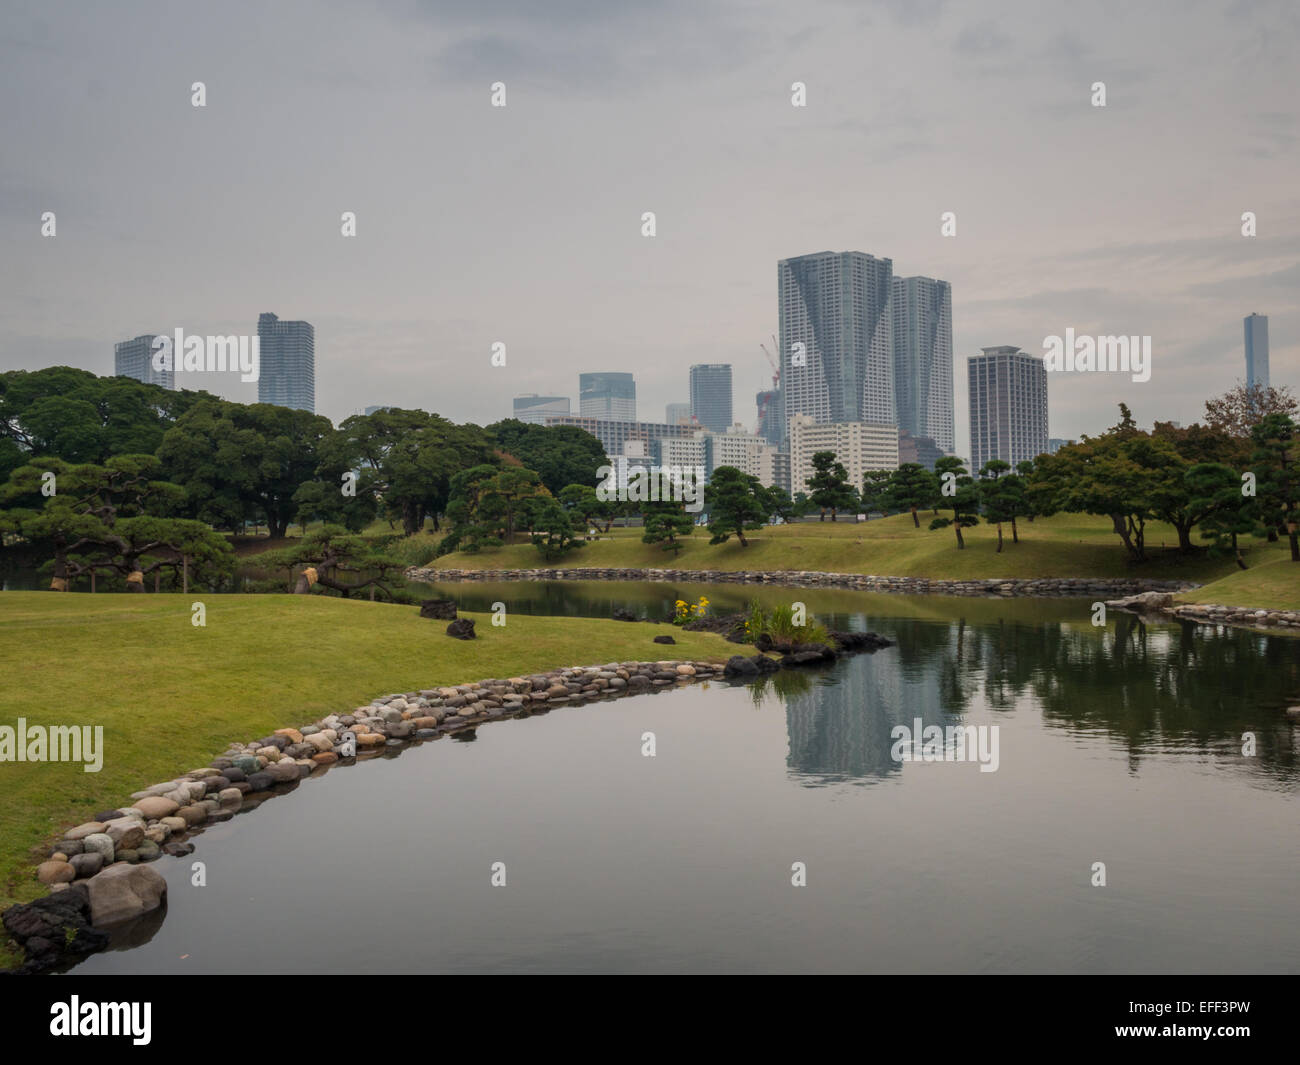 Japanese garden landscape of Hama Rikyu Onshi-teien reflected in the water Stock Photo